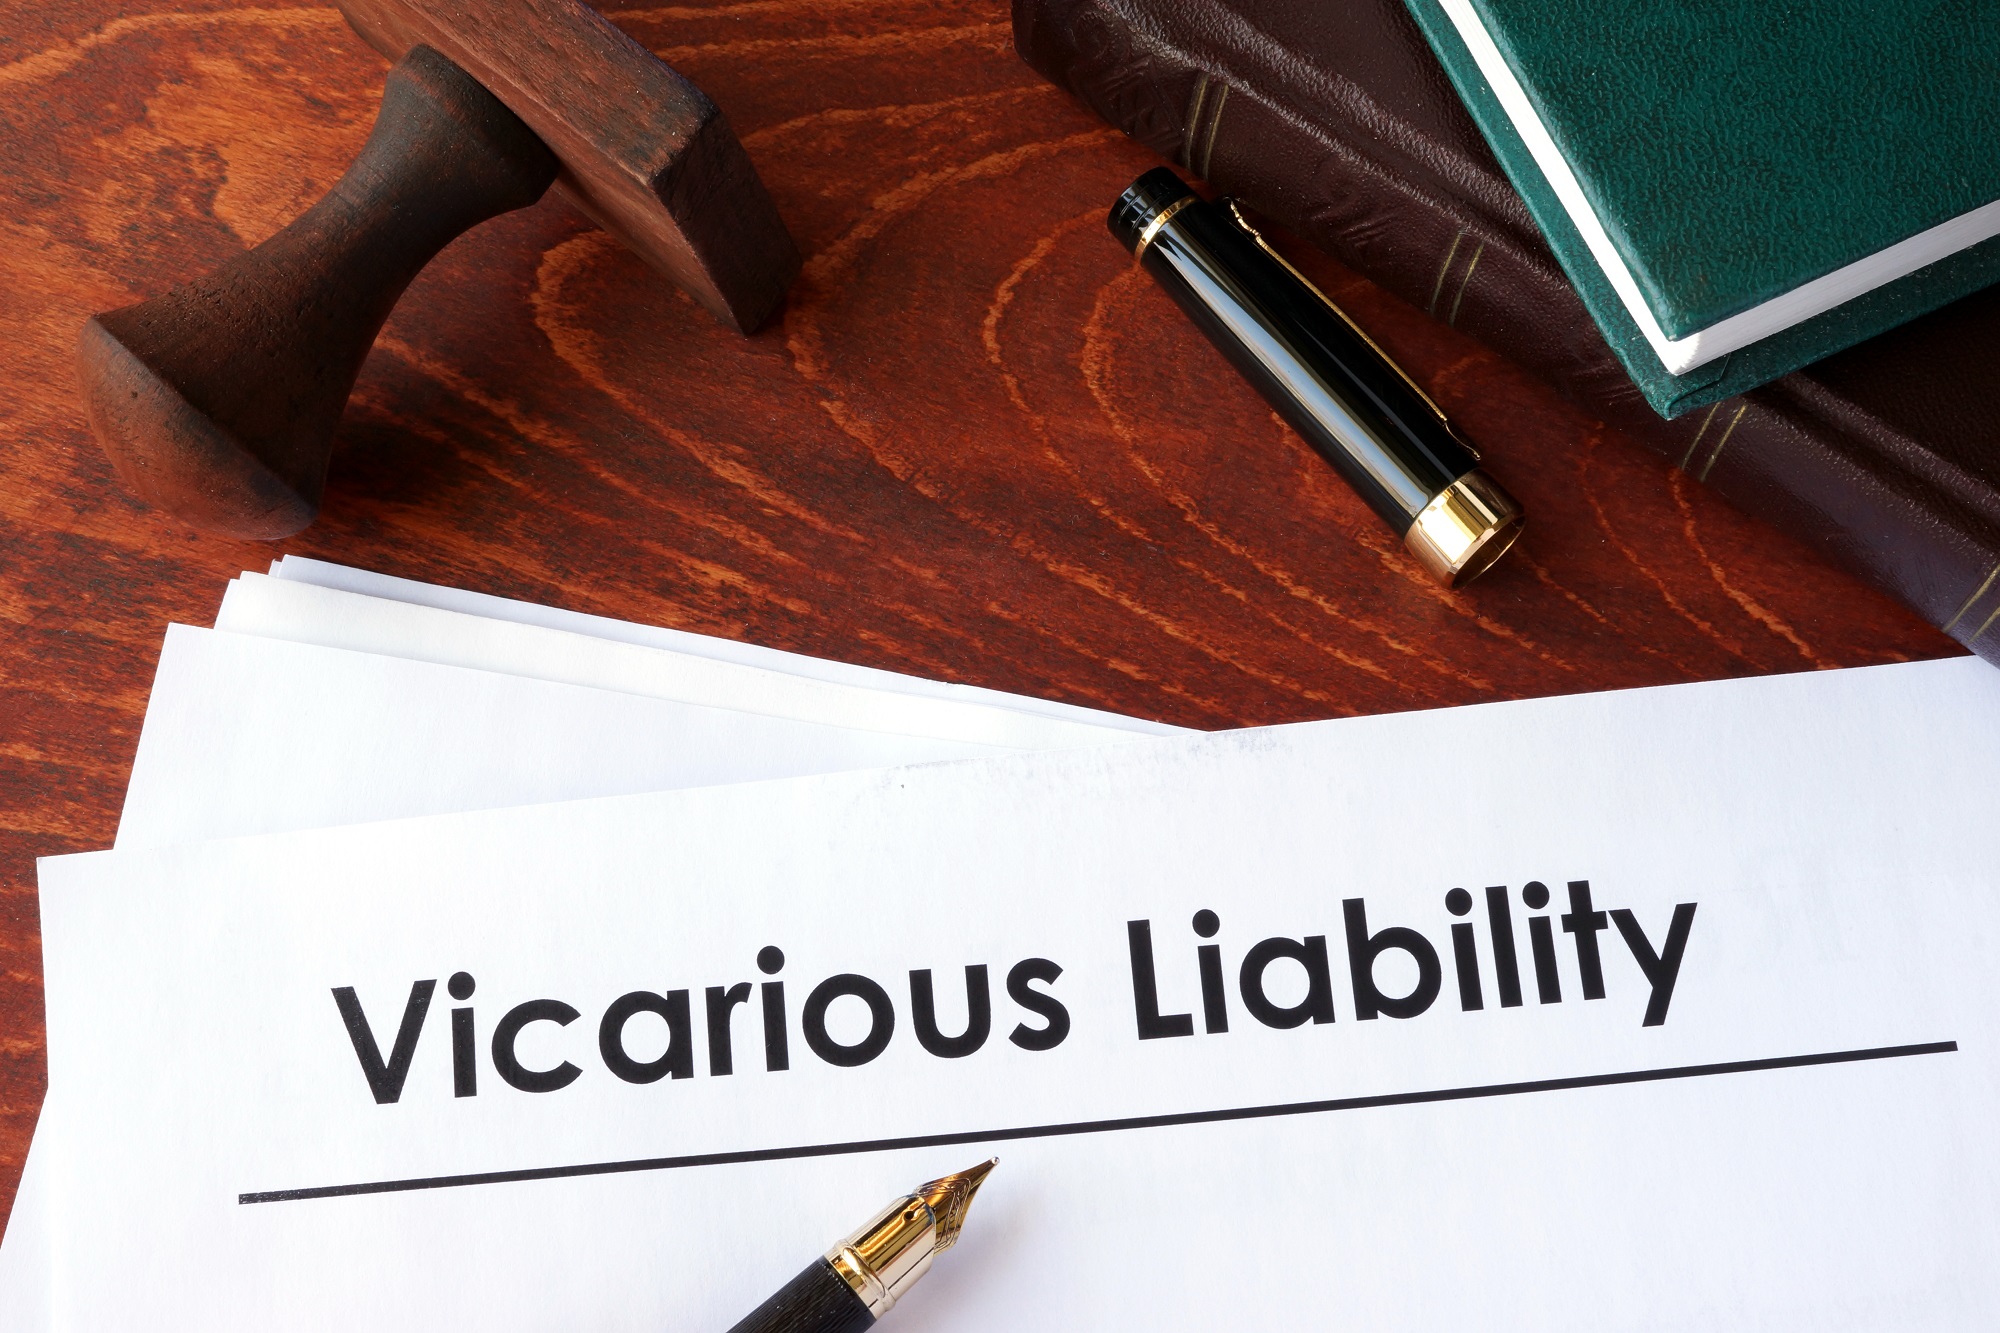 Vicarious Liability - The Question of Connection